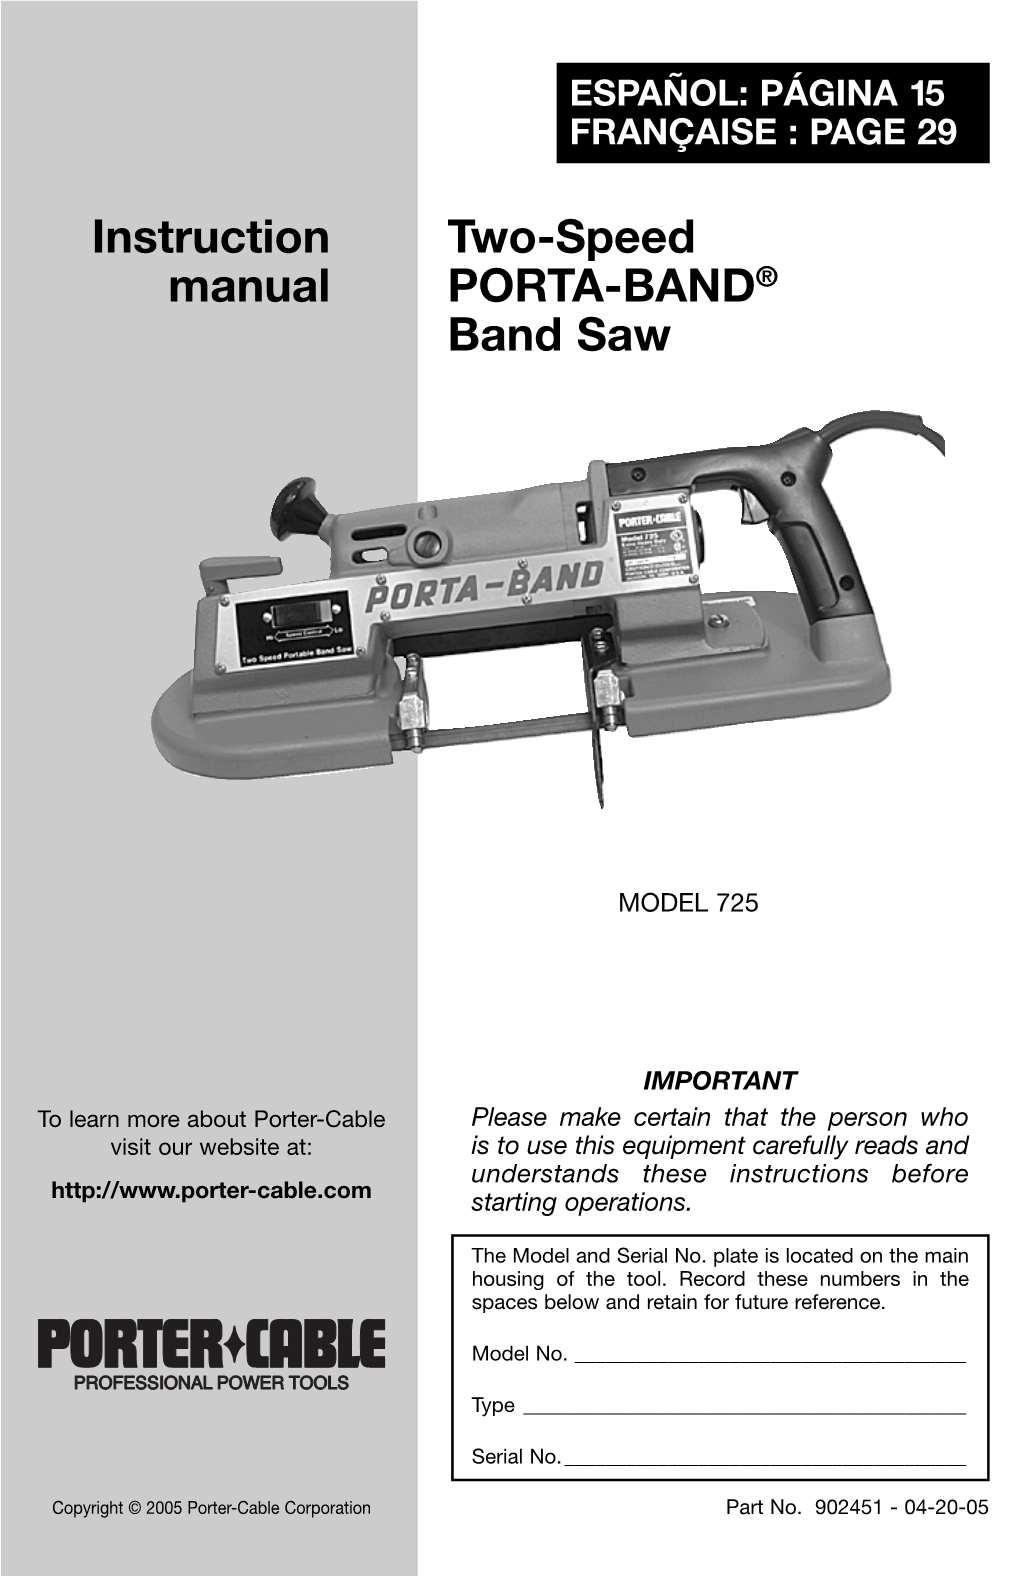 Two-Speed PORTA-BAND® Band Saw Instruction Manual